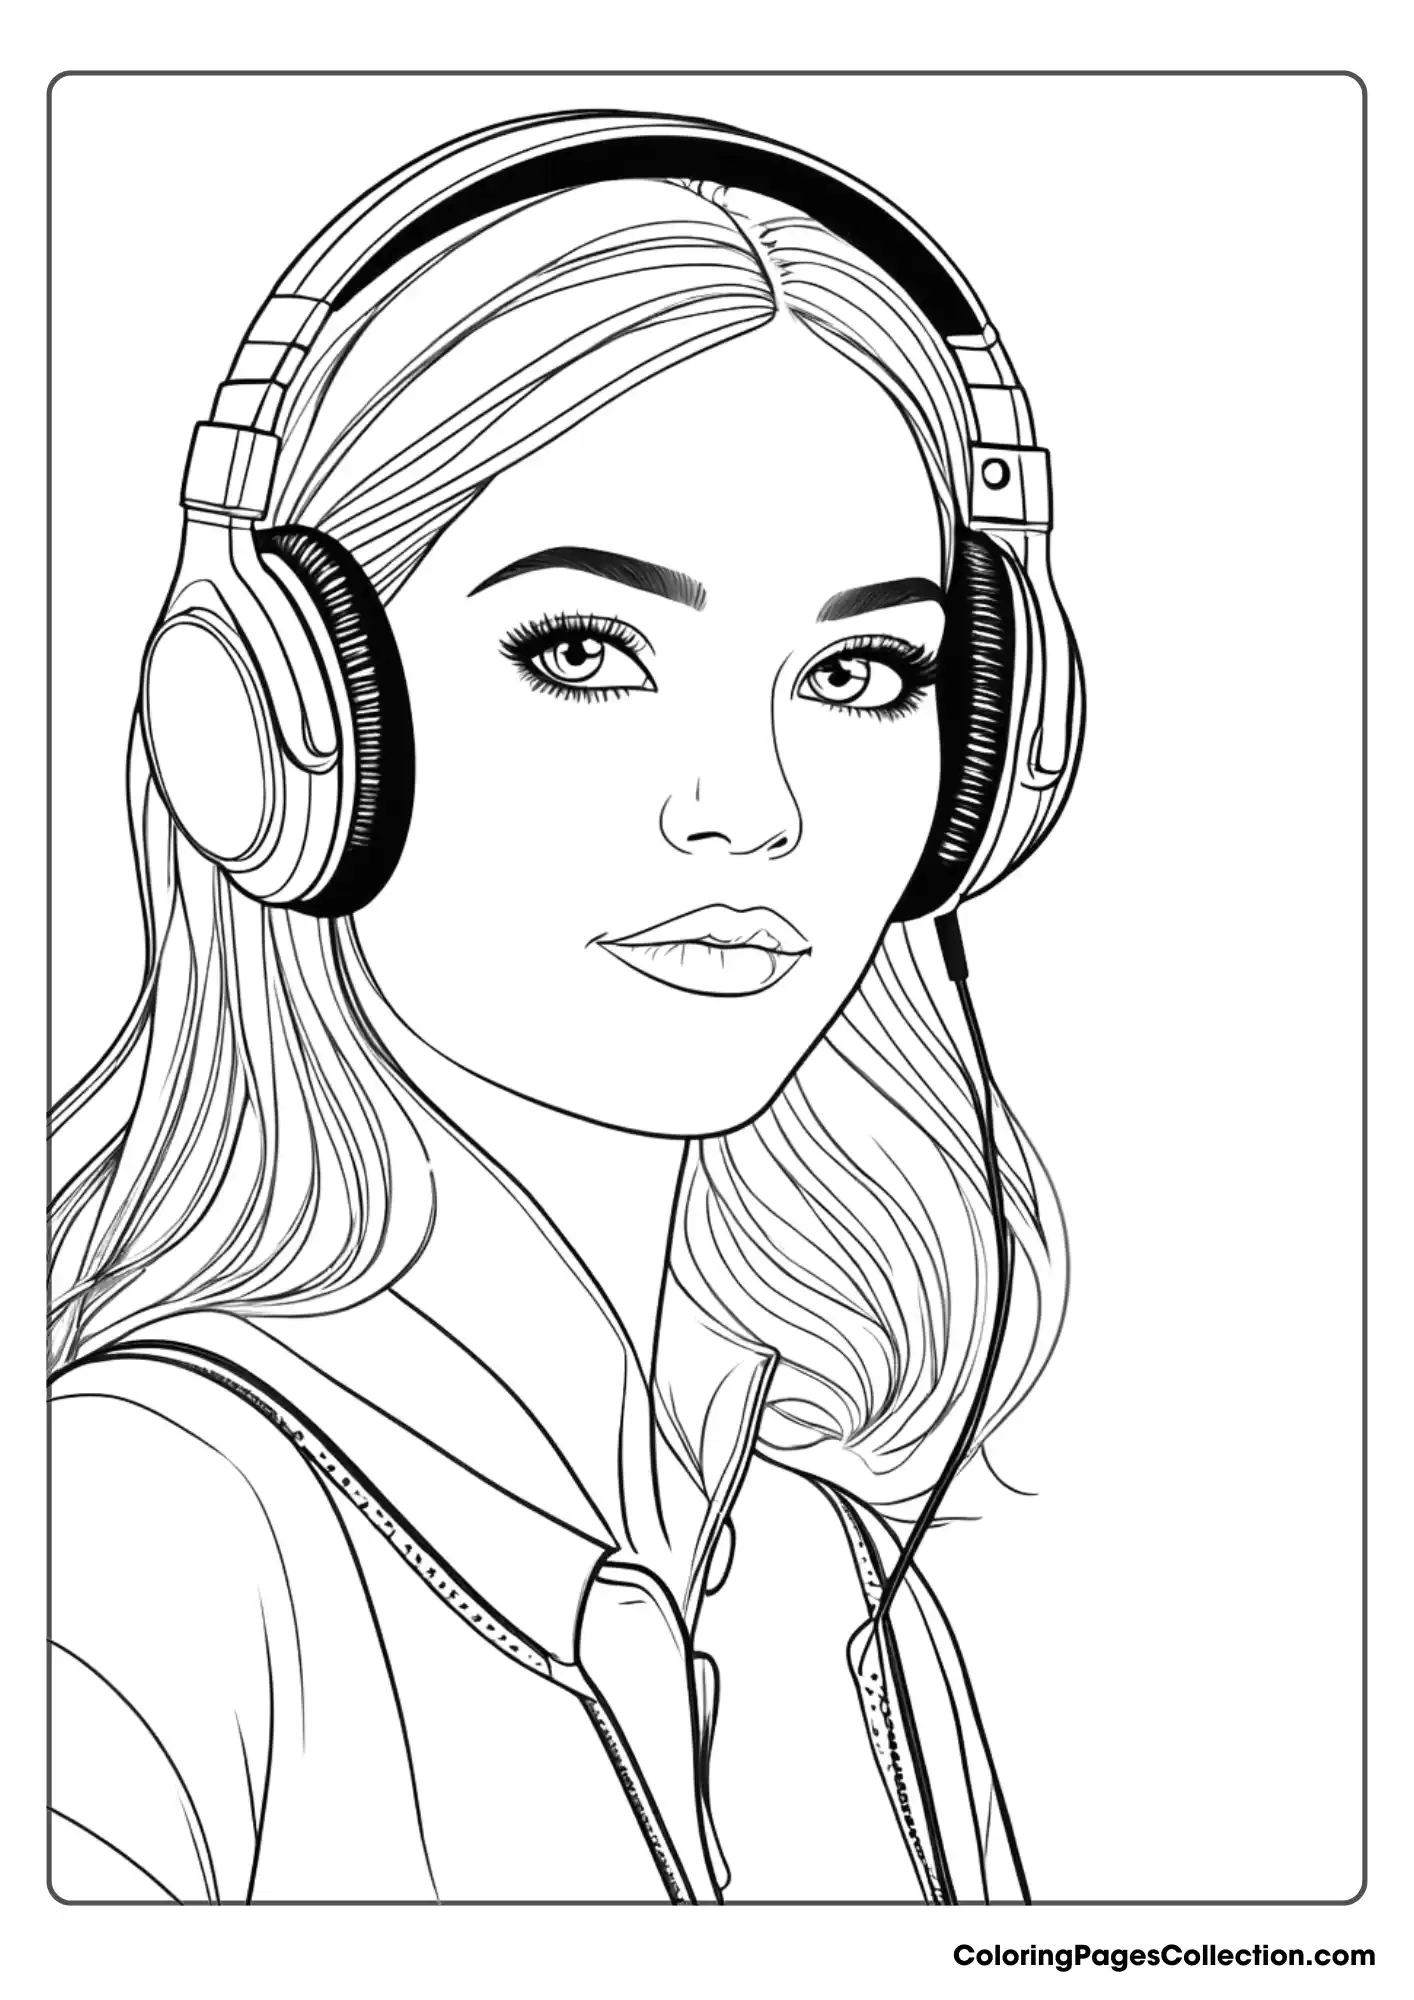 Coloring pages for teens, Realistic Girl With Headphone